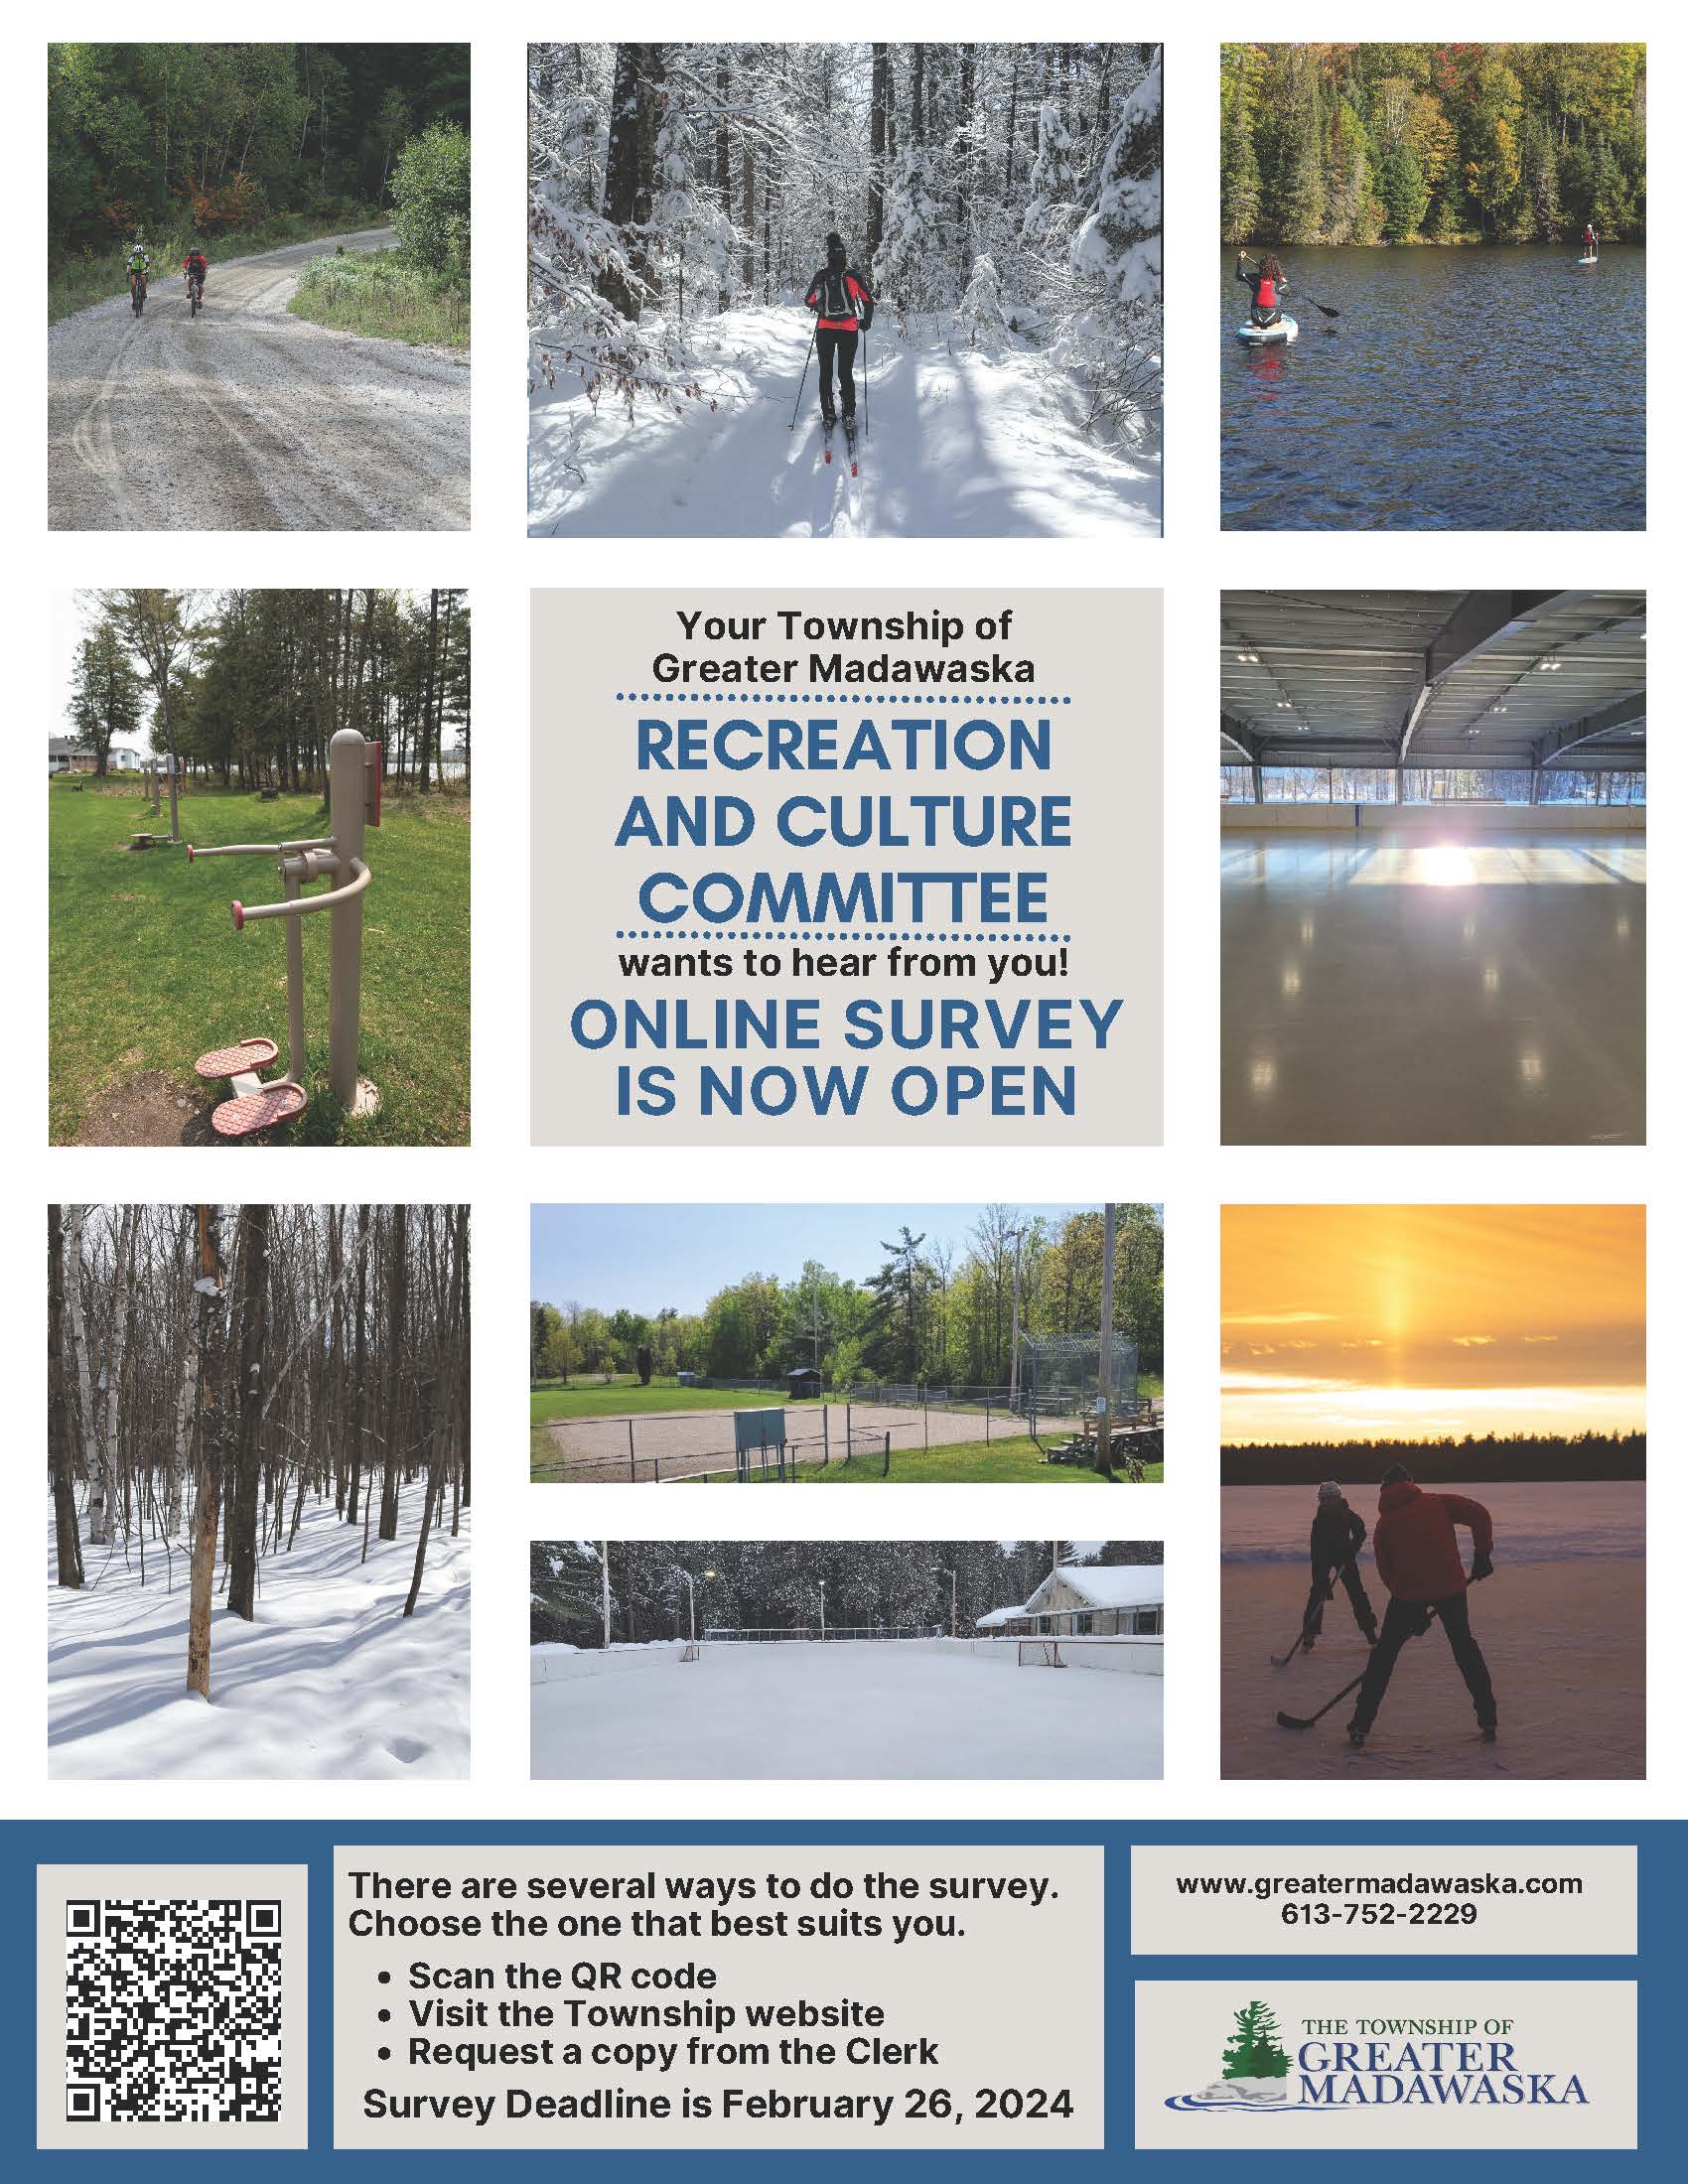 Recreation and culture committee survey poster